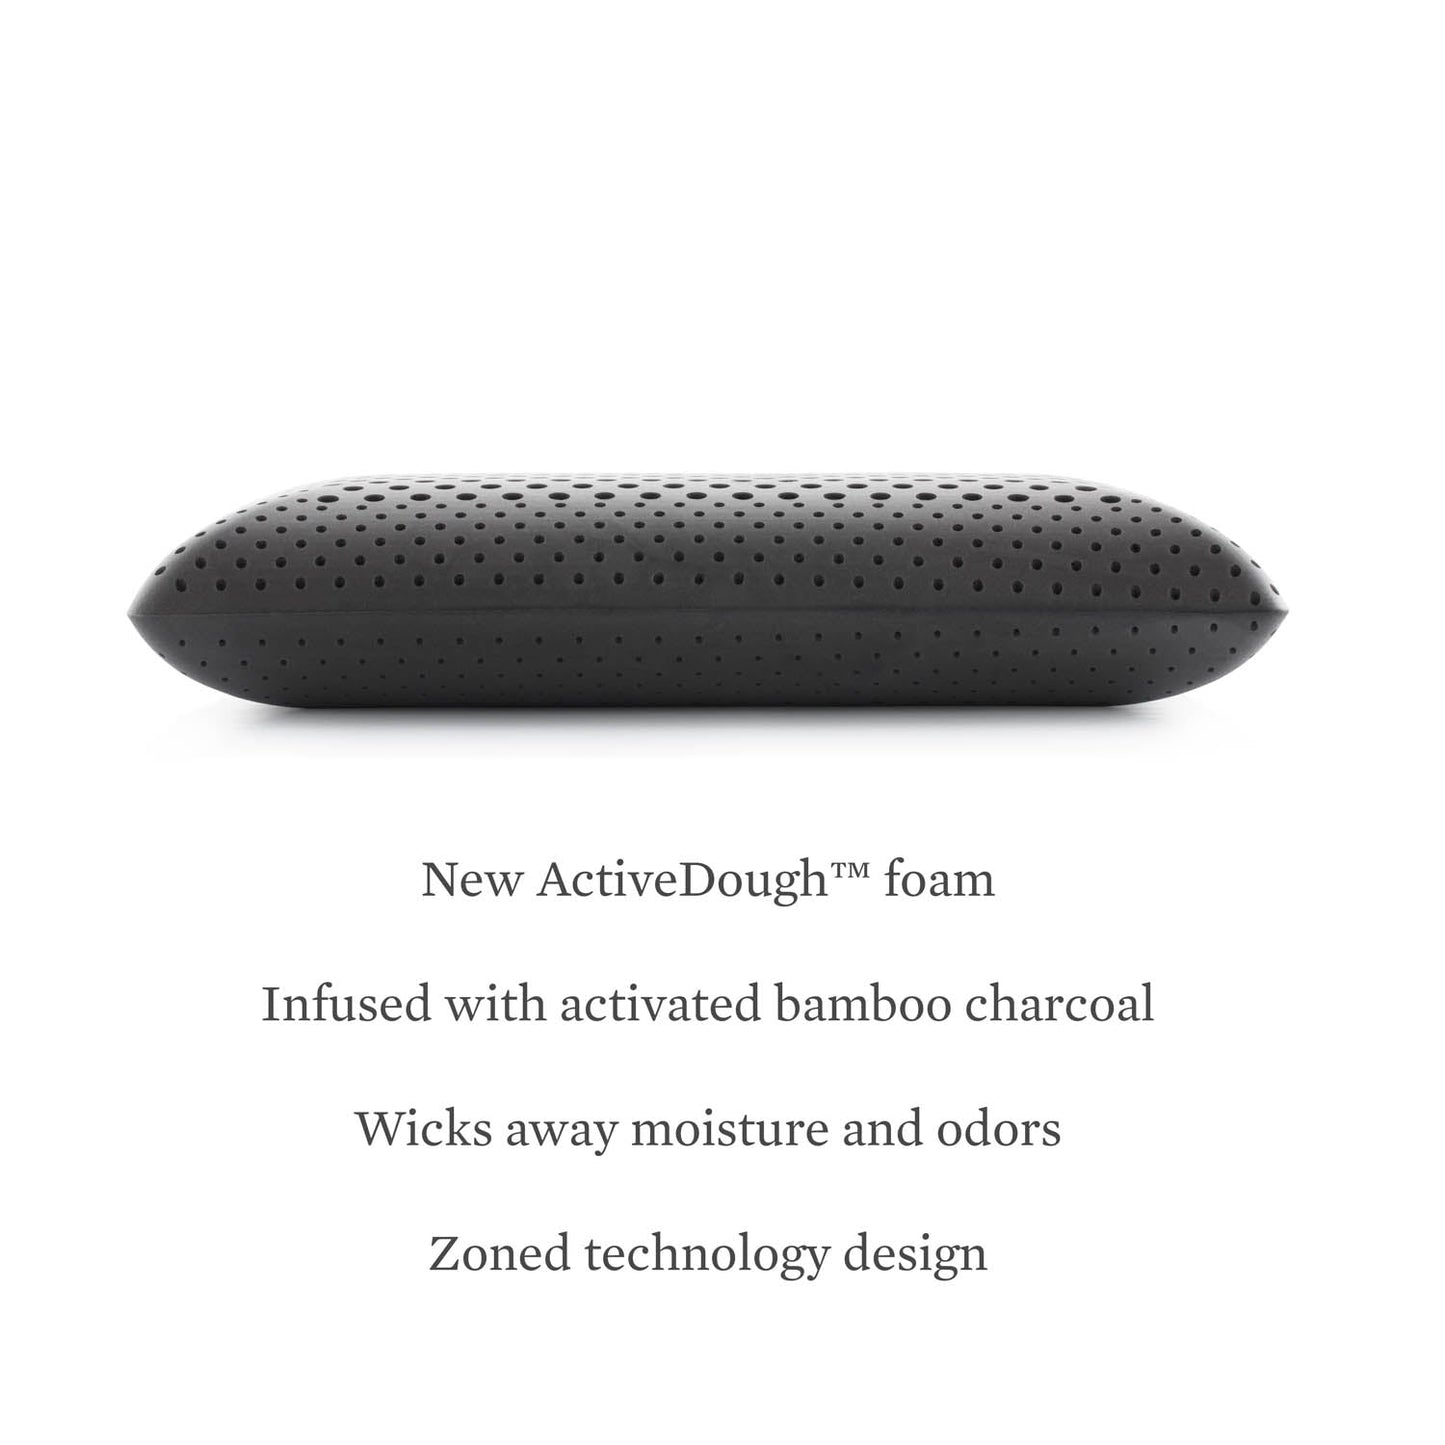 Zoned ActiveDough & Bamboo Charcoal